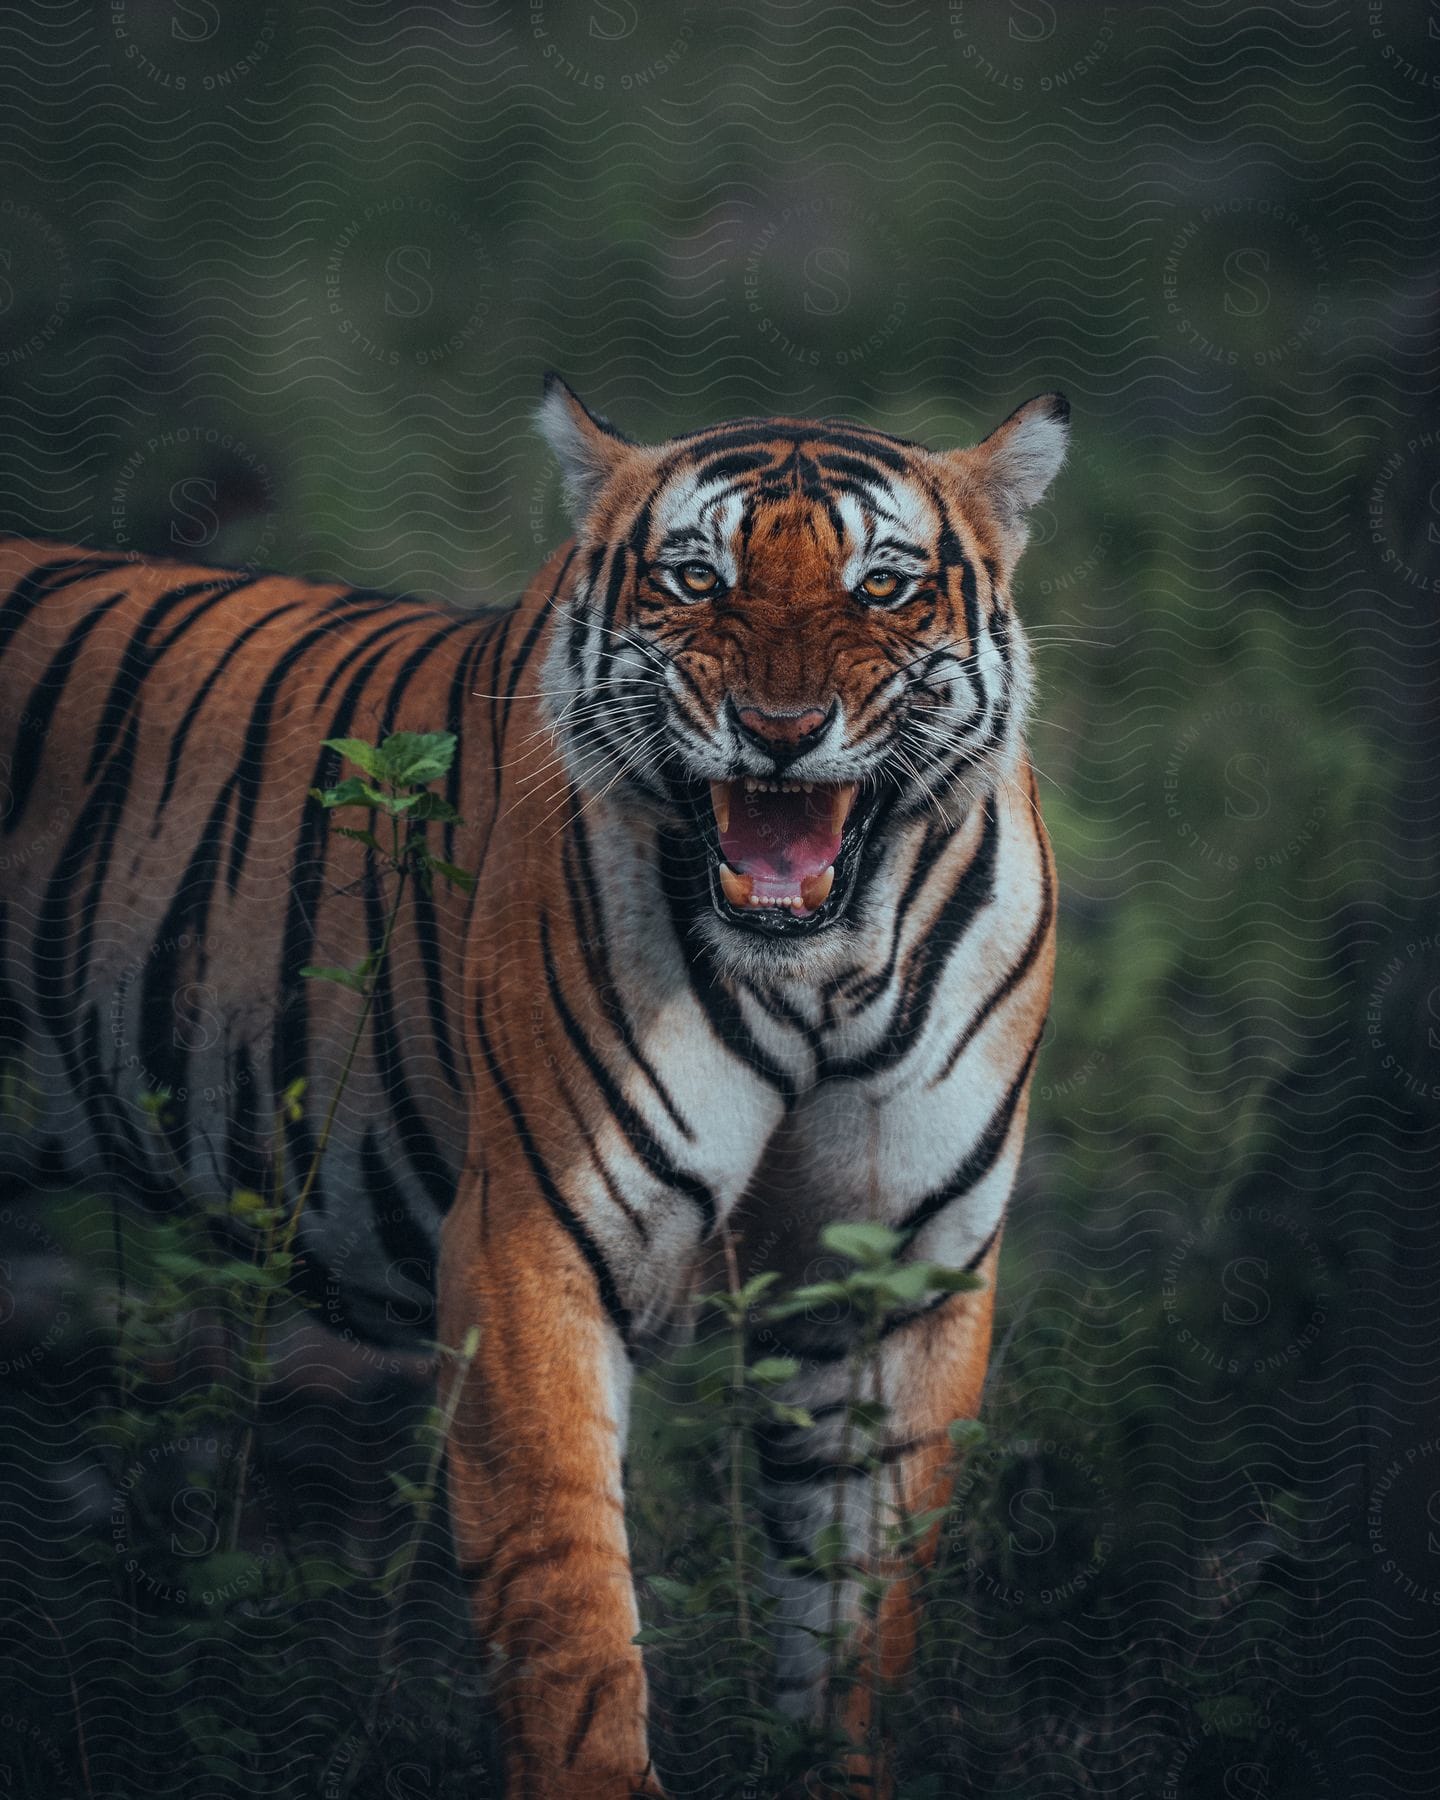 A bengal tiger stands near a tree with its mouth open looking ahead in the wilderness